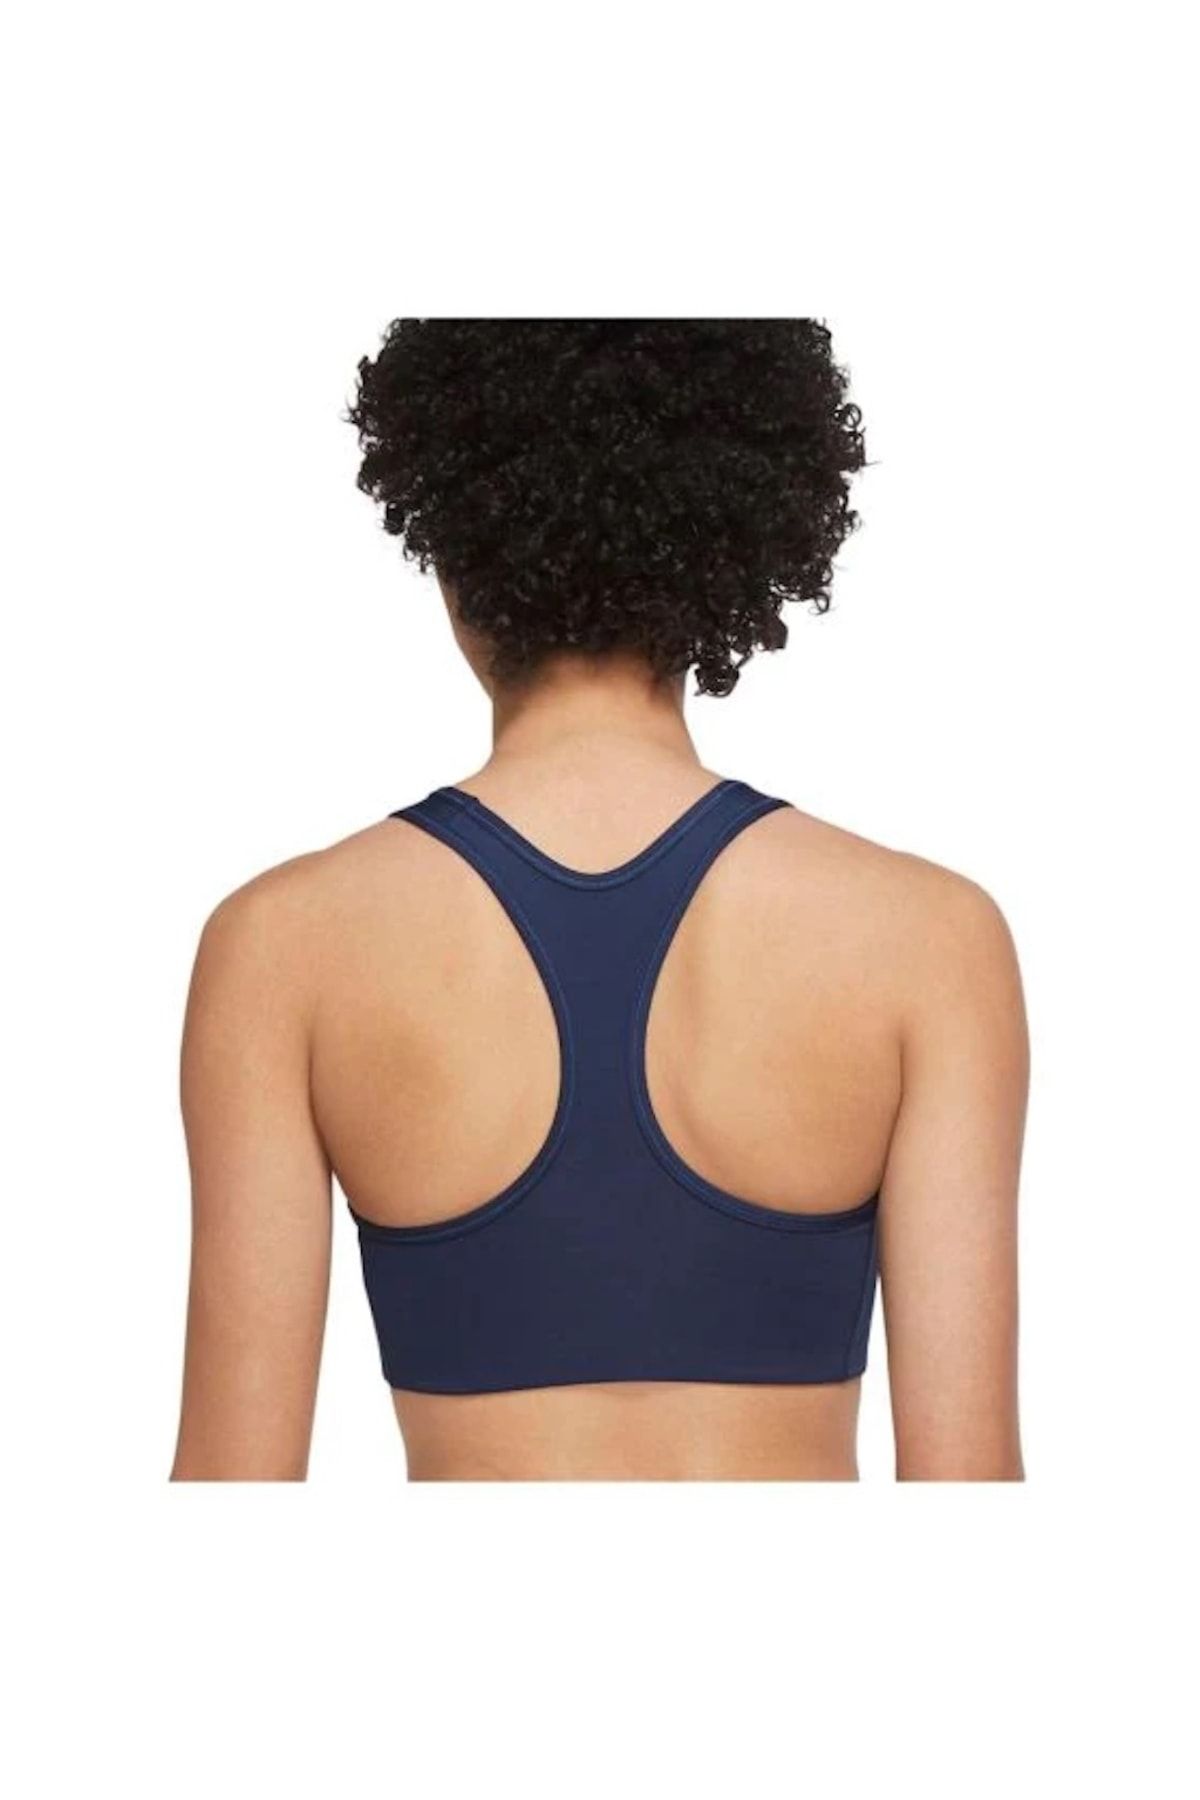 Nike Swoosh Dri-Fit Grey Recycled Polyester Sports Bra - XS – Le Prix  Fashion & Consulting